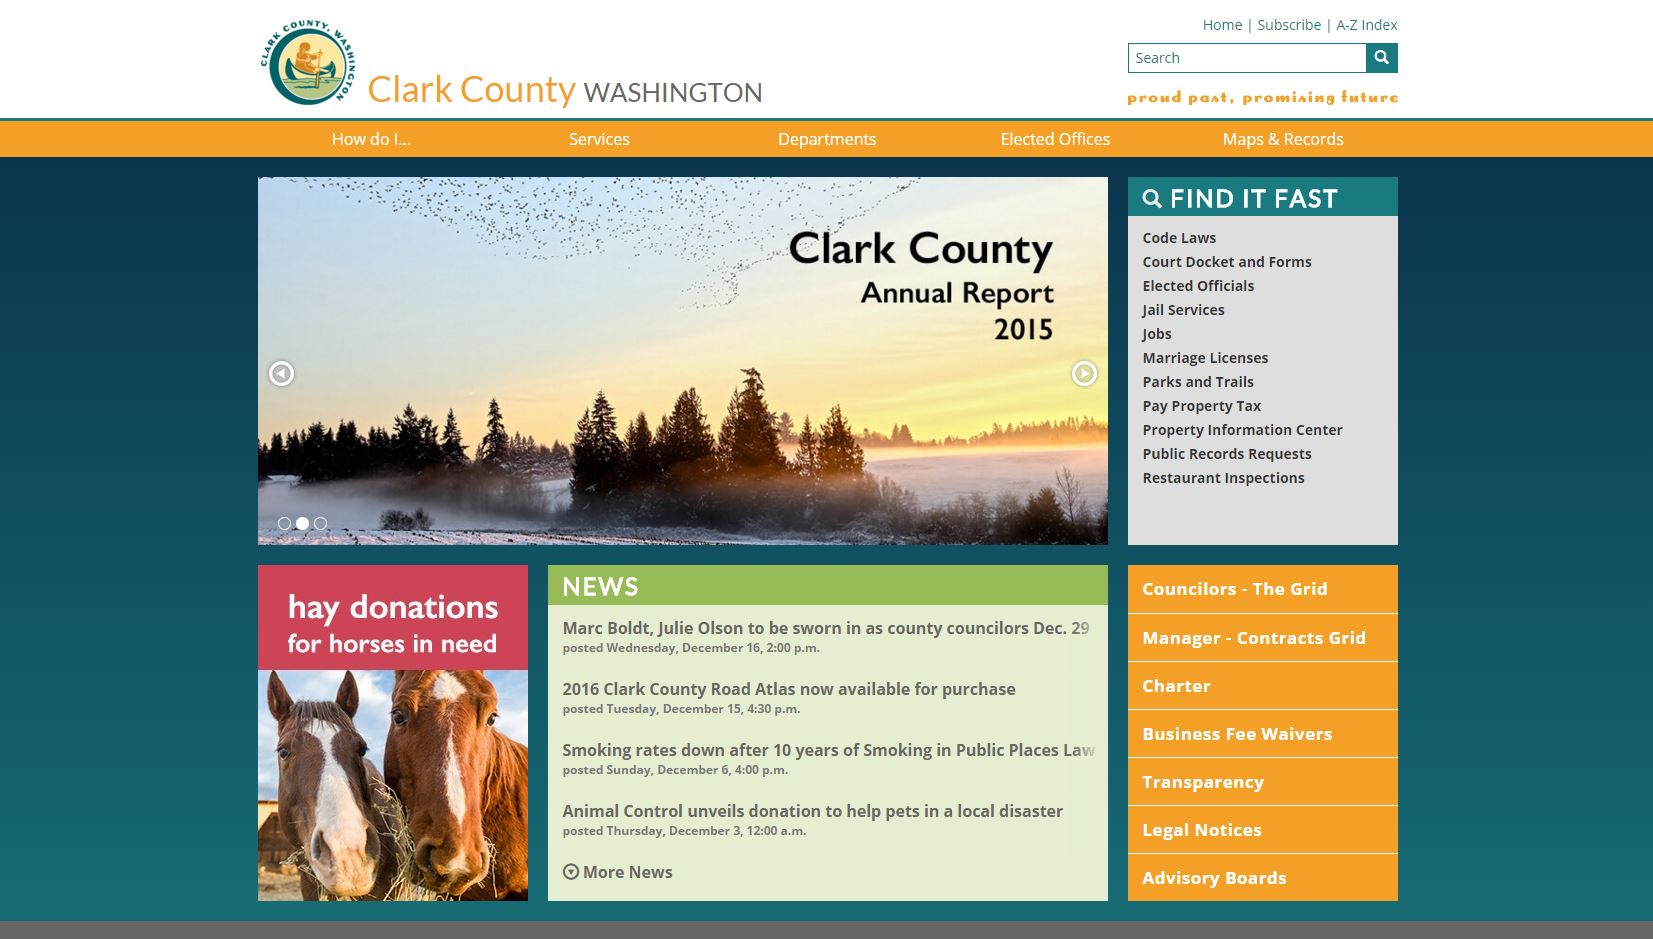 The homepage of Clark County's shiny new website.